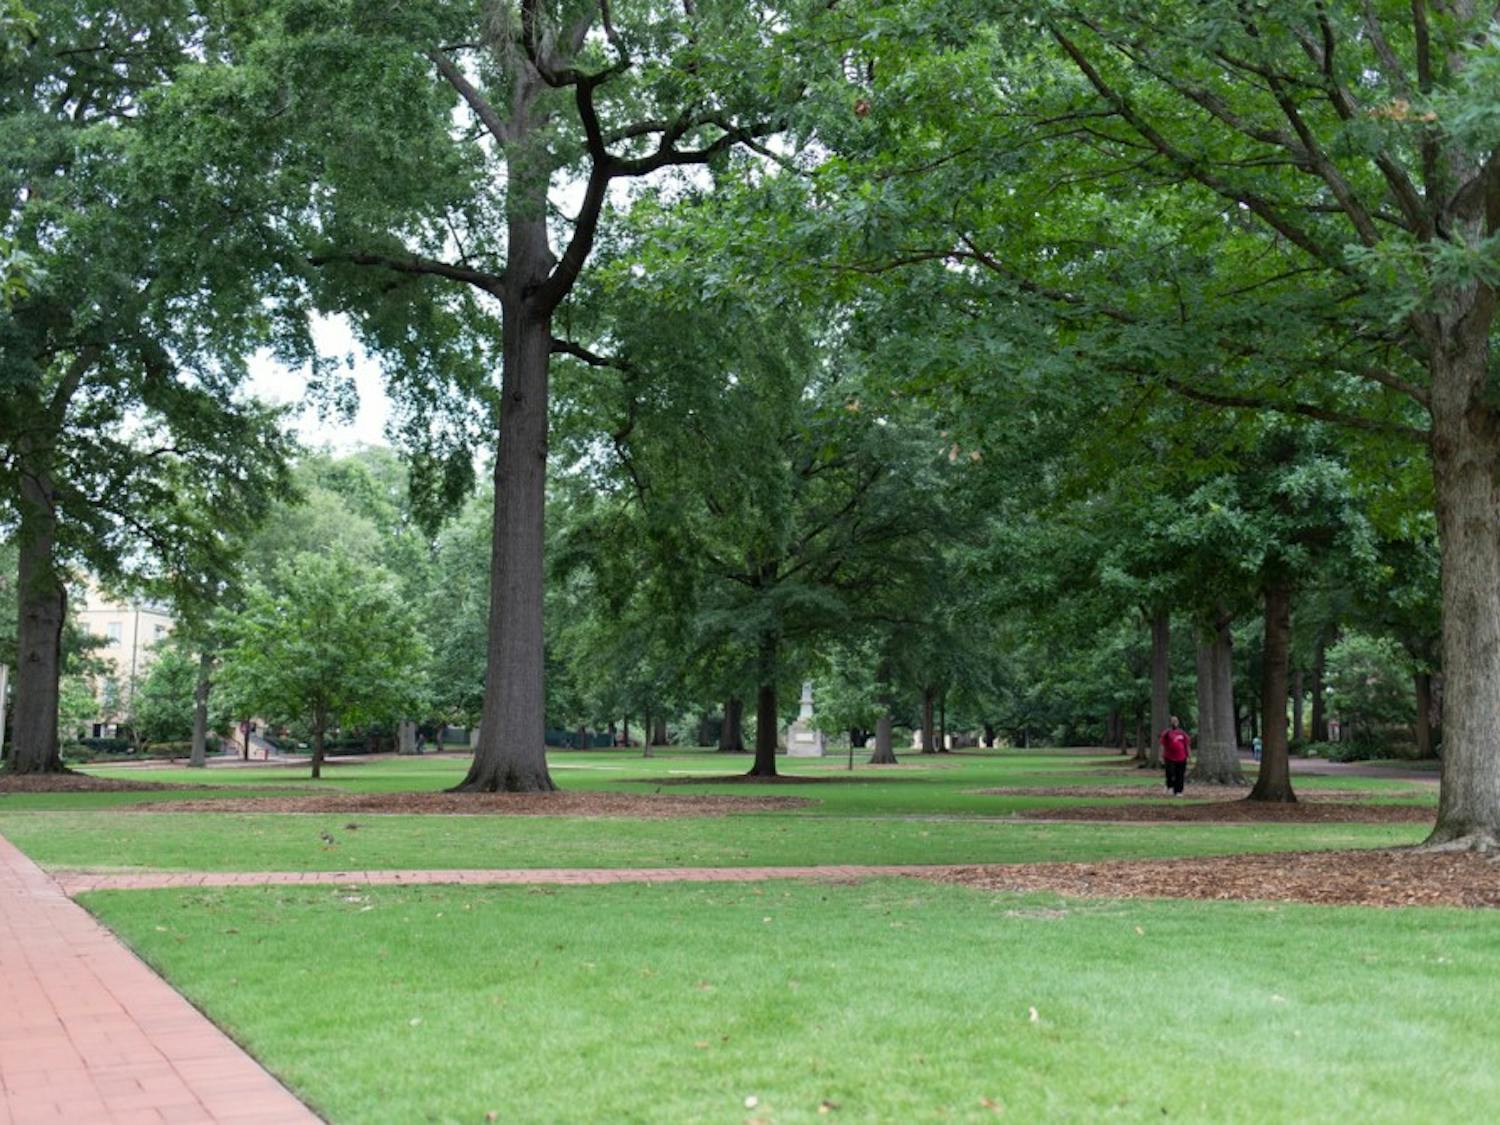 Pictures of Columbia and USC's campus throughout the summer of 2019 (an ongoing series.)